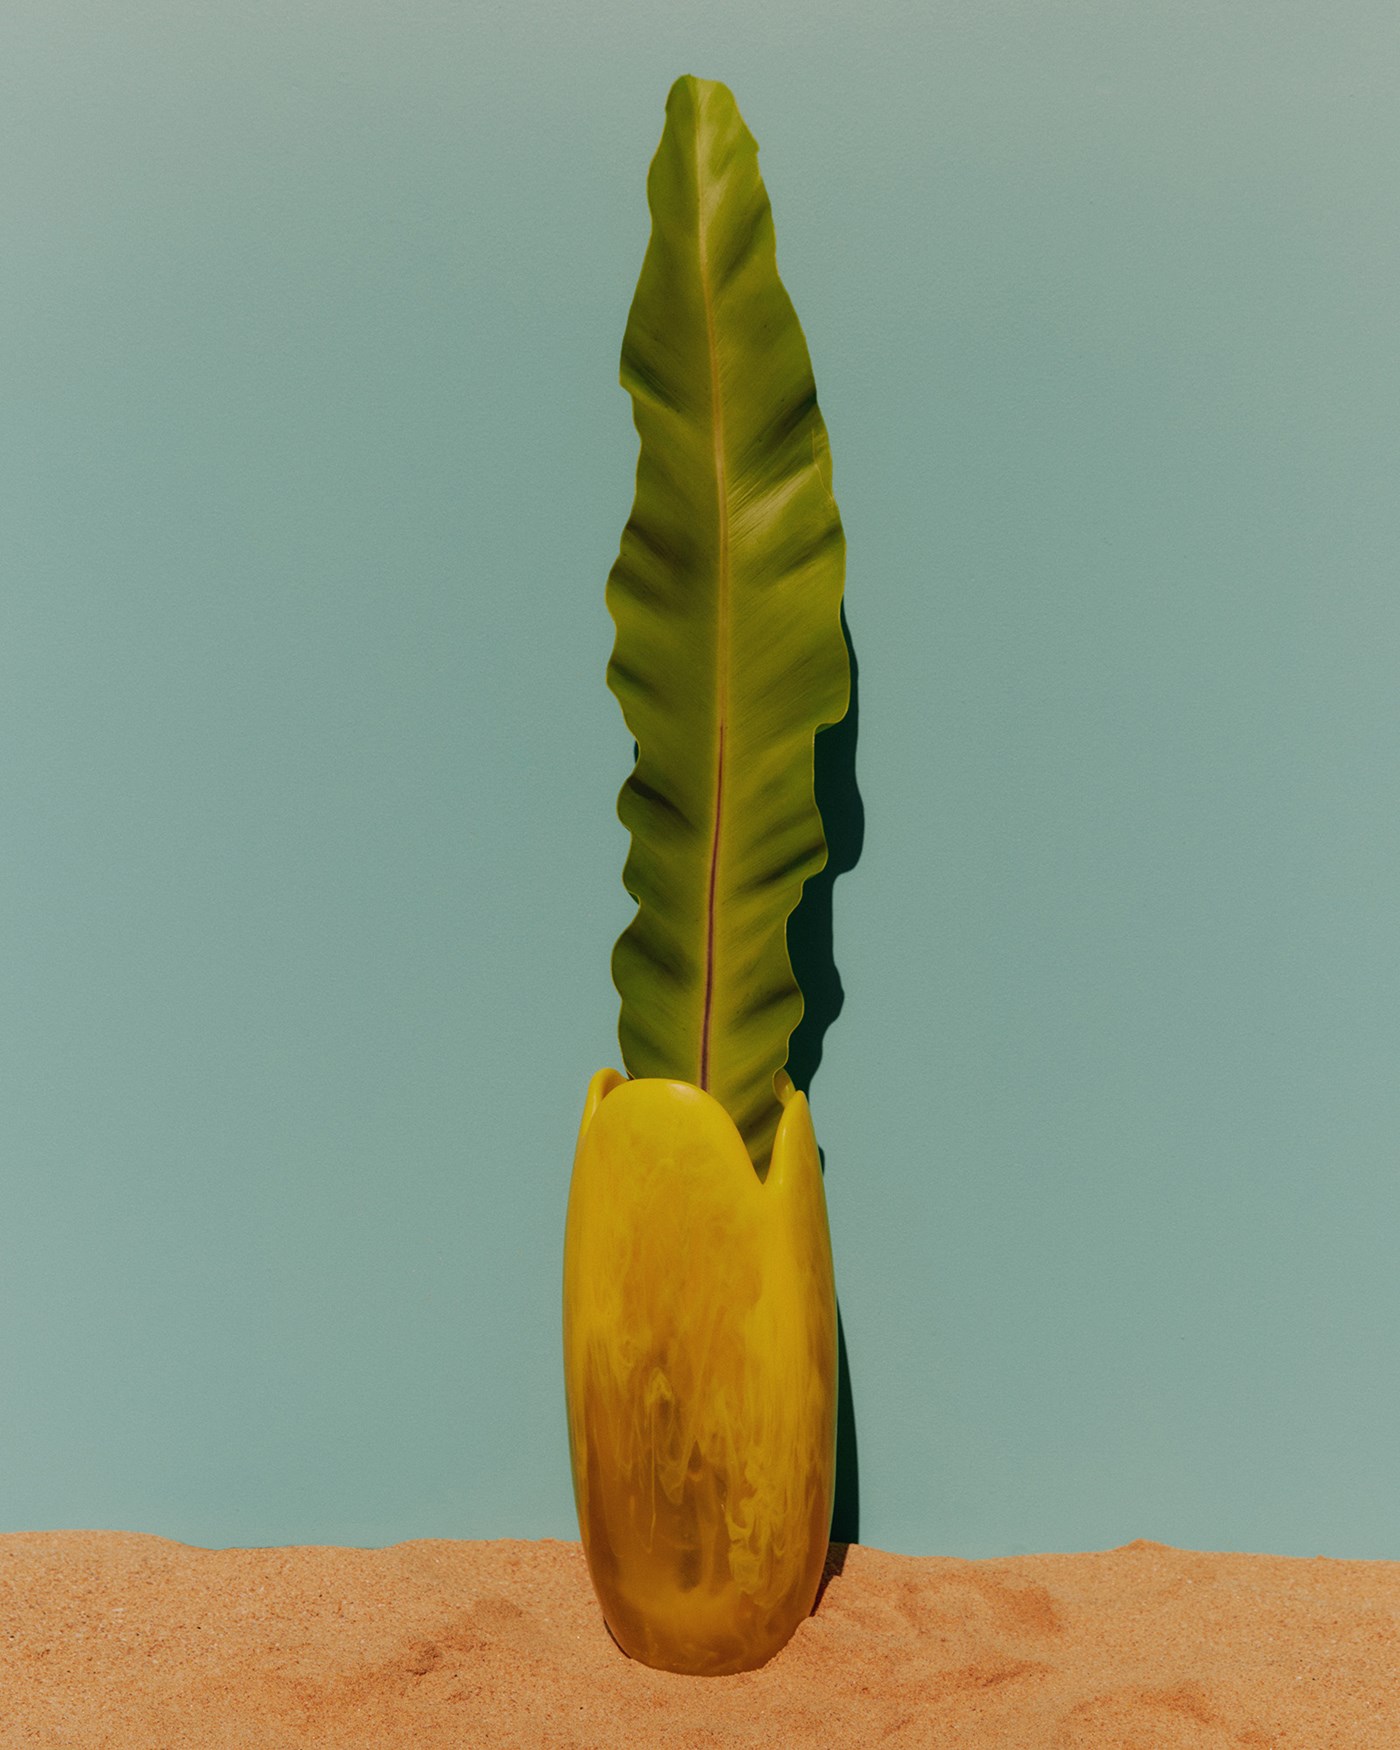 A yellow resin vase with a long leaf sticking out sitting on some sand